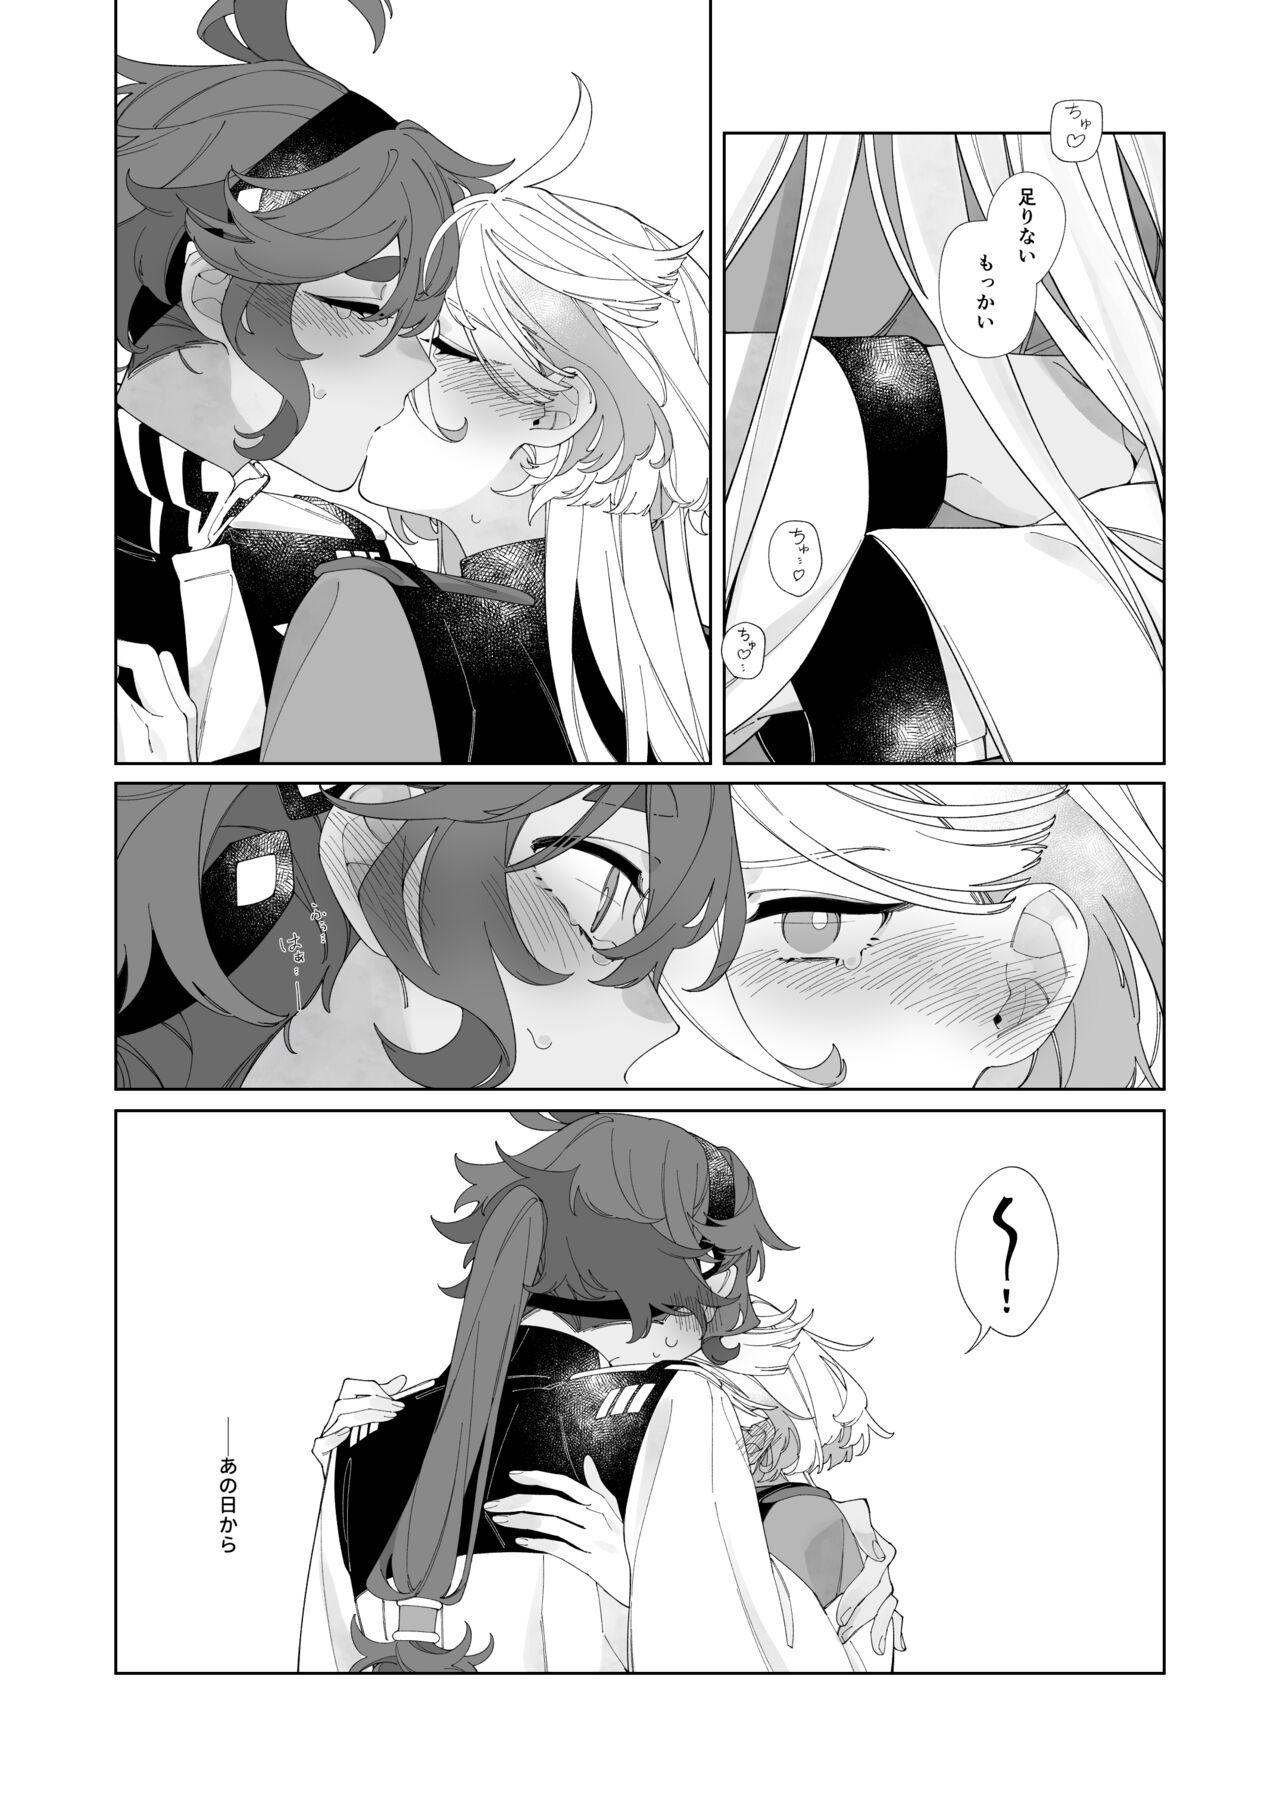 Chica Kiss no Ato Nani ga Shitai? - After kissing, what else do you want to do? - Mobile suit gundam the witch from mercury Backshots - Page 8